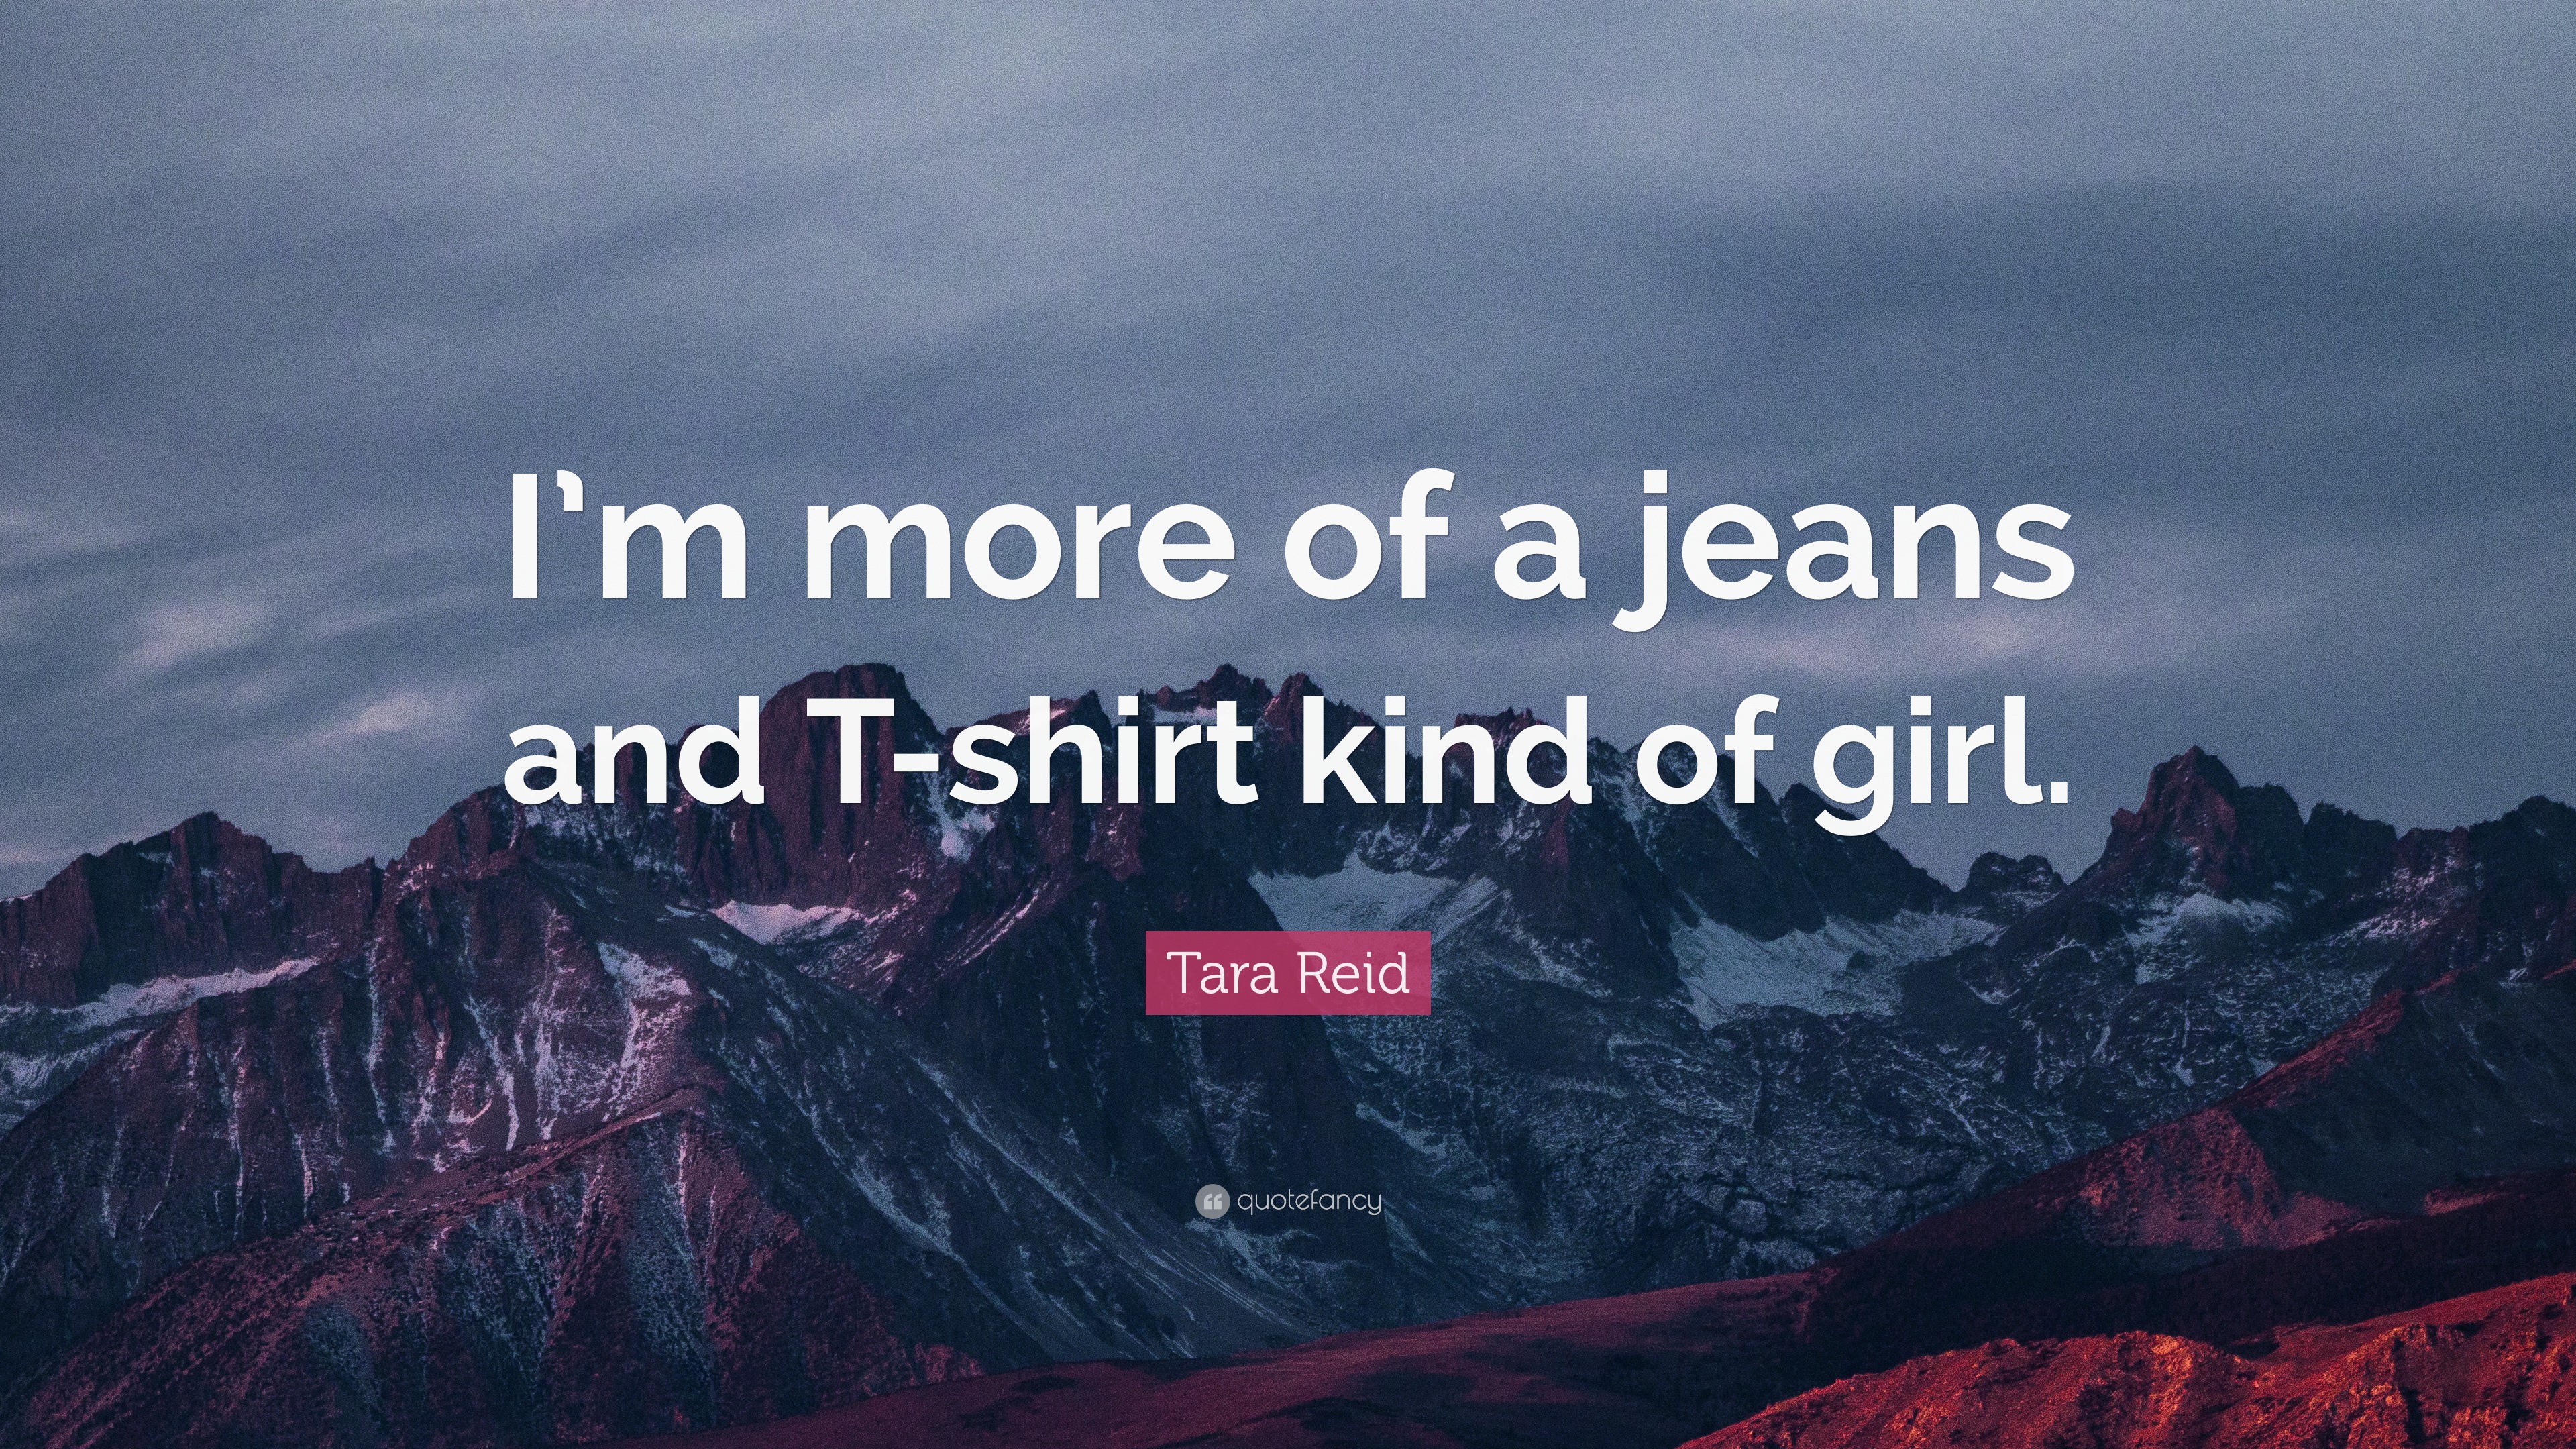 Tara Reid Quote: “I’m more of a jeans and T-shirt kind of girl.”